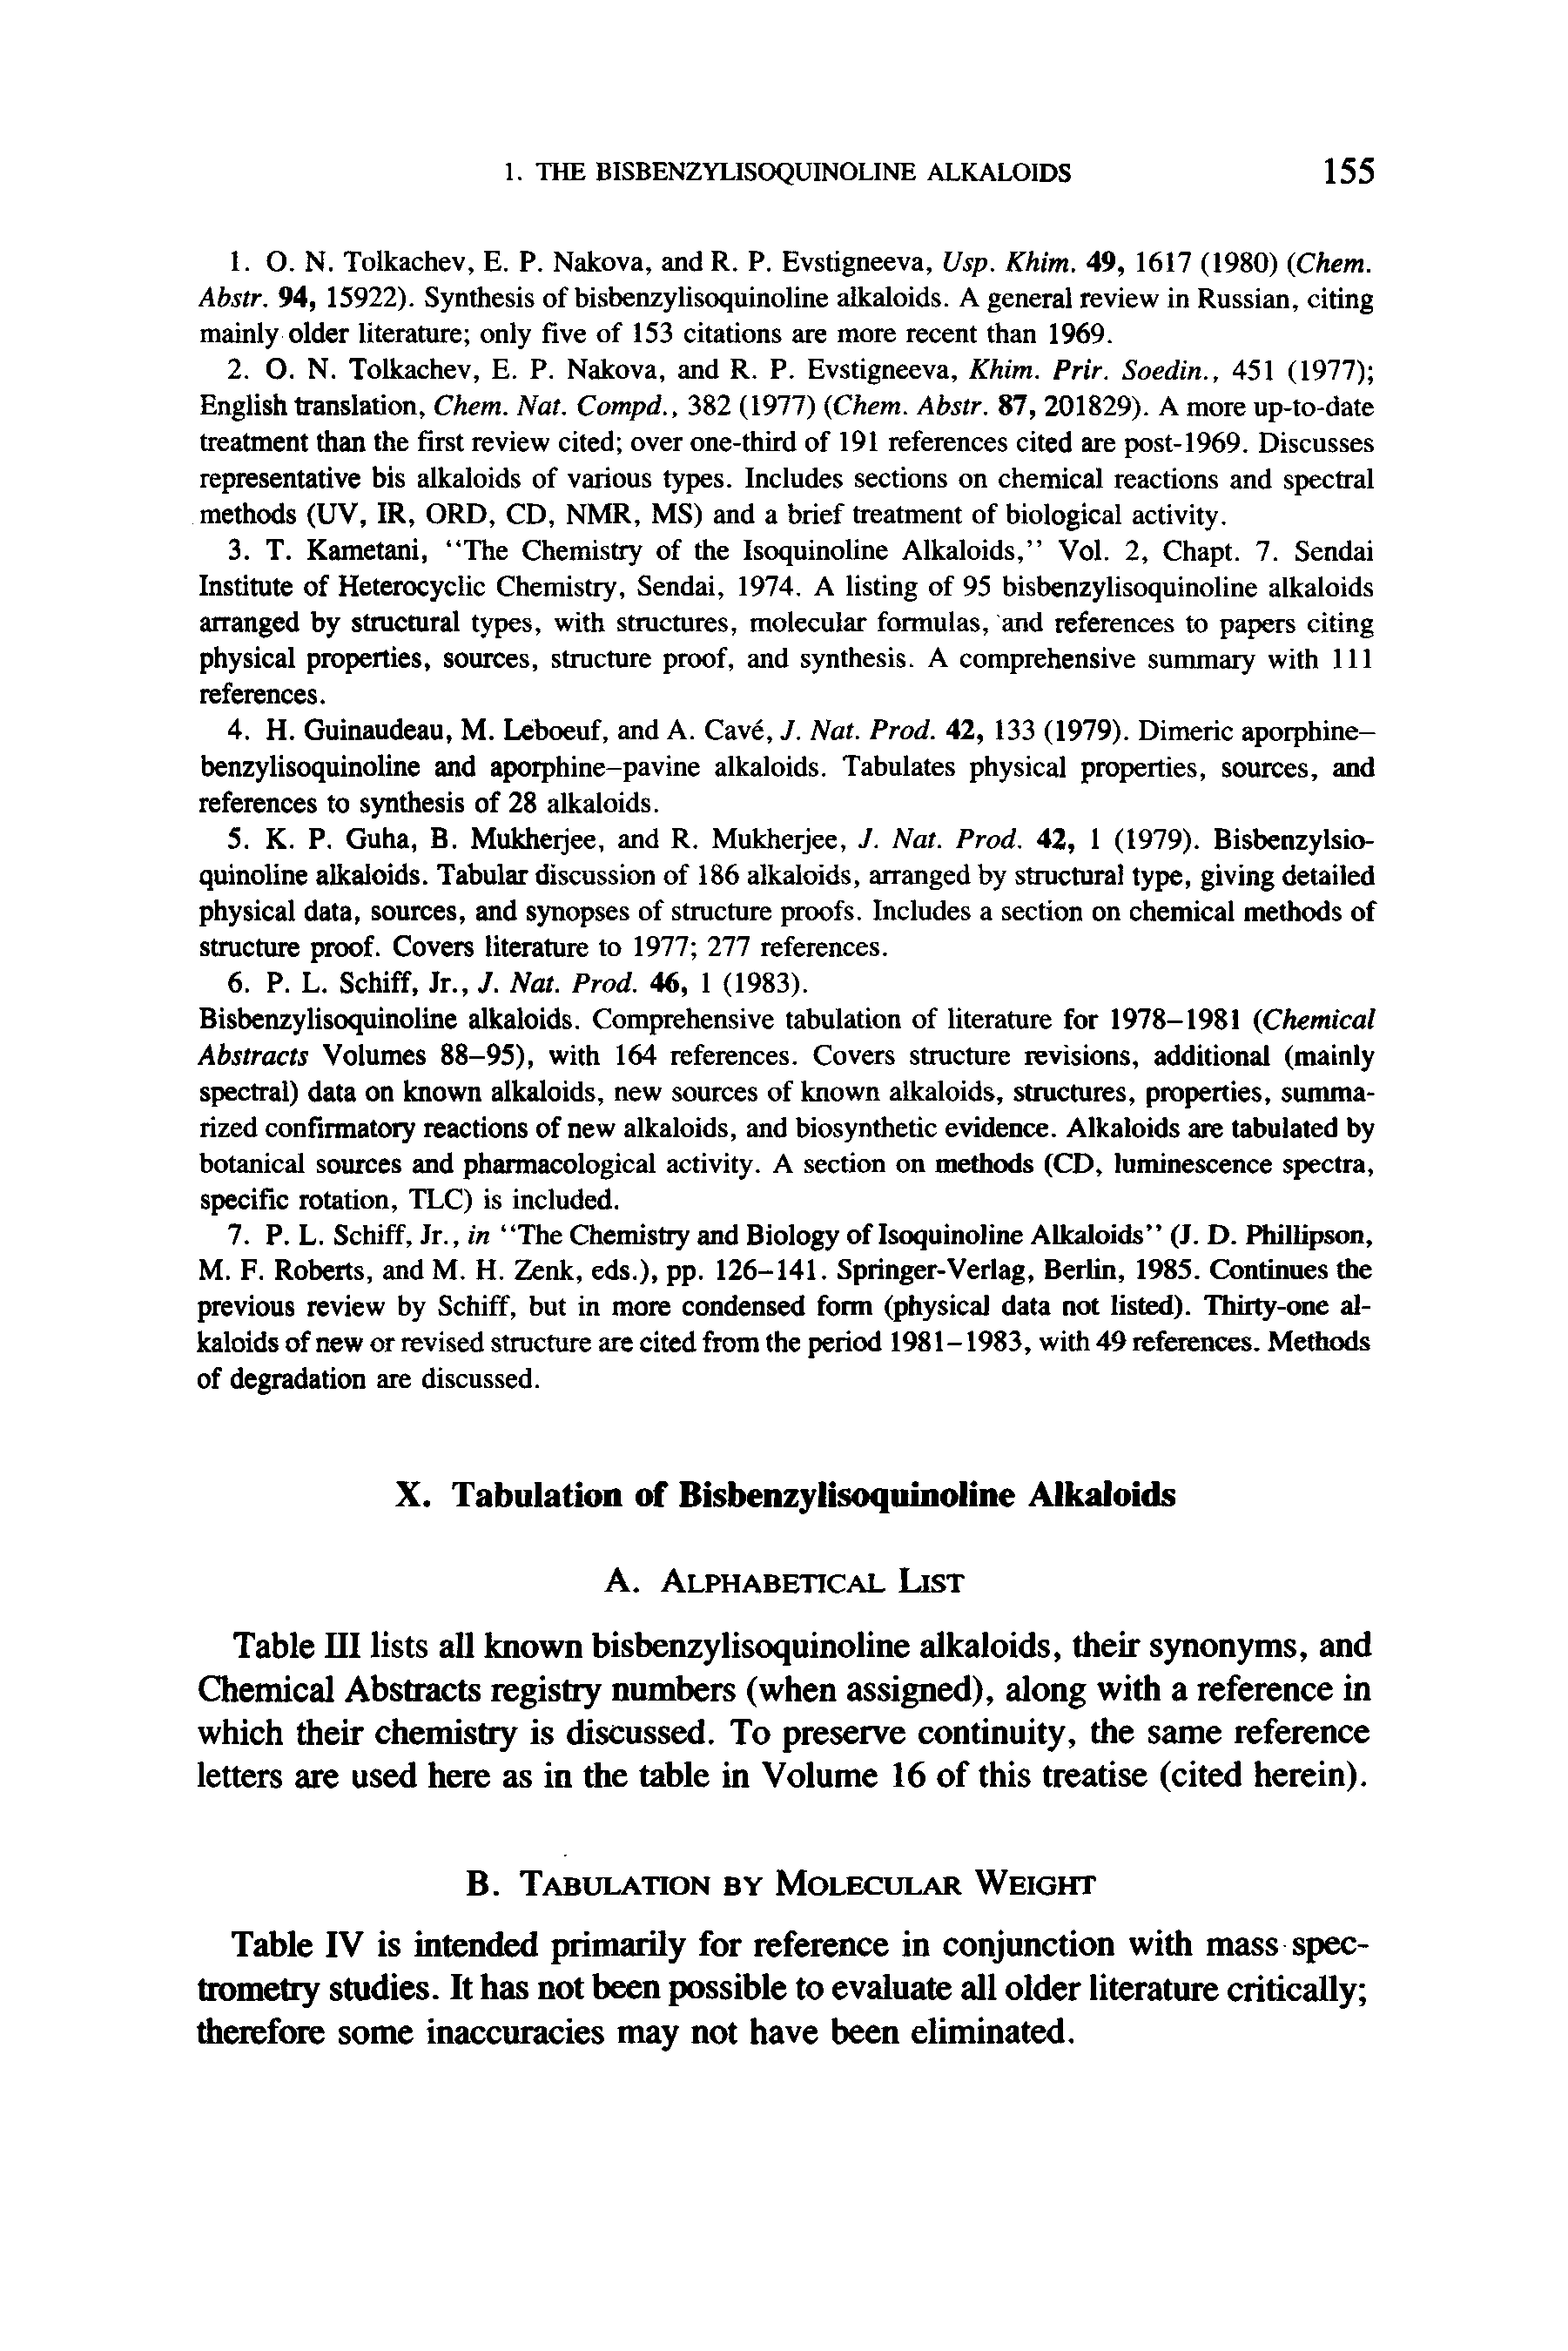 Table III lists all known bisbenzylisoquinoline alkaloids, their synonyms, and Chemical Abstracts registry numbers (when assigned), along with a reference in which their chemistry is discussed. To preserve continuity, the same reference letters are used here as in the table in Volume 16 of this treatise (cited herein).